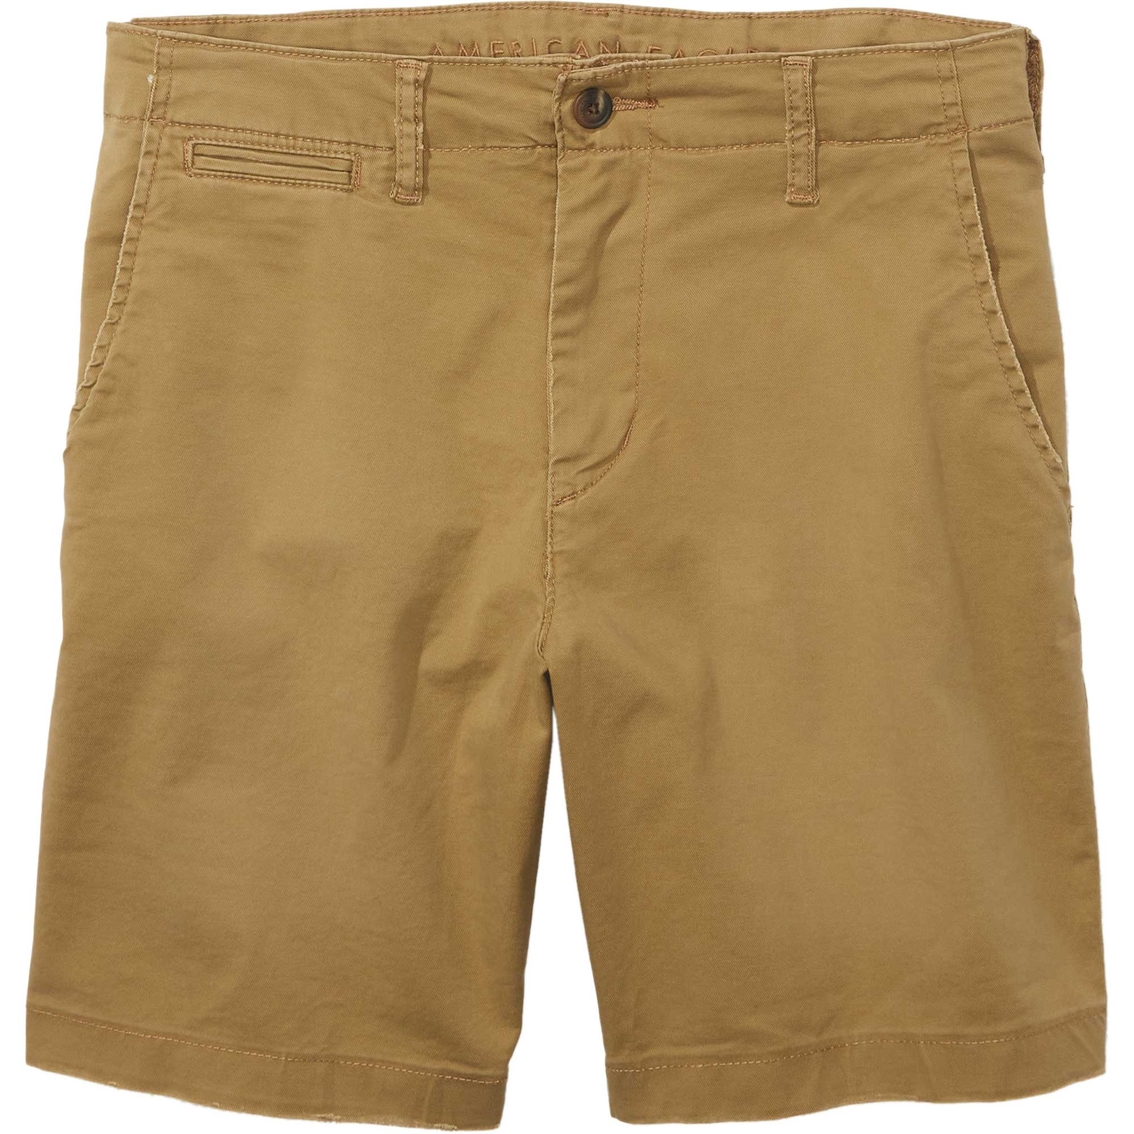 American Eagle 9 In. Khaki Shorts | Shorts | Clothing & Accessories ...